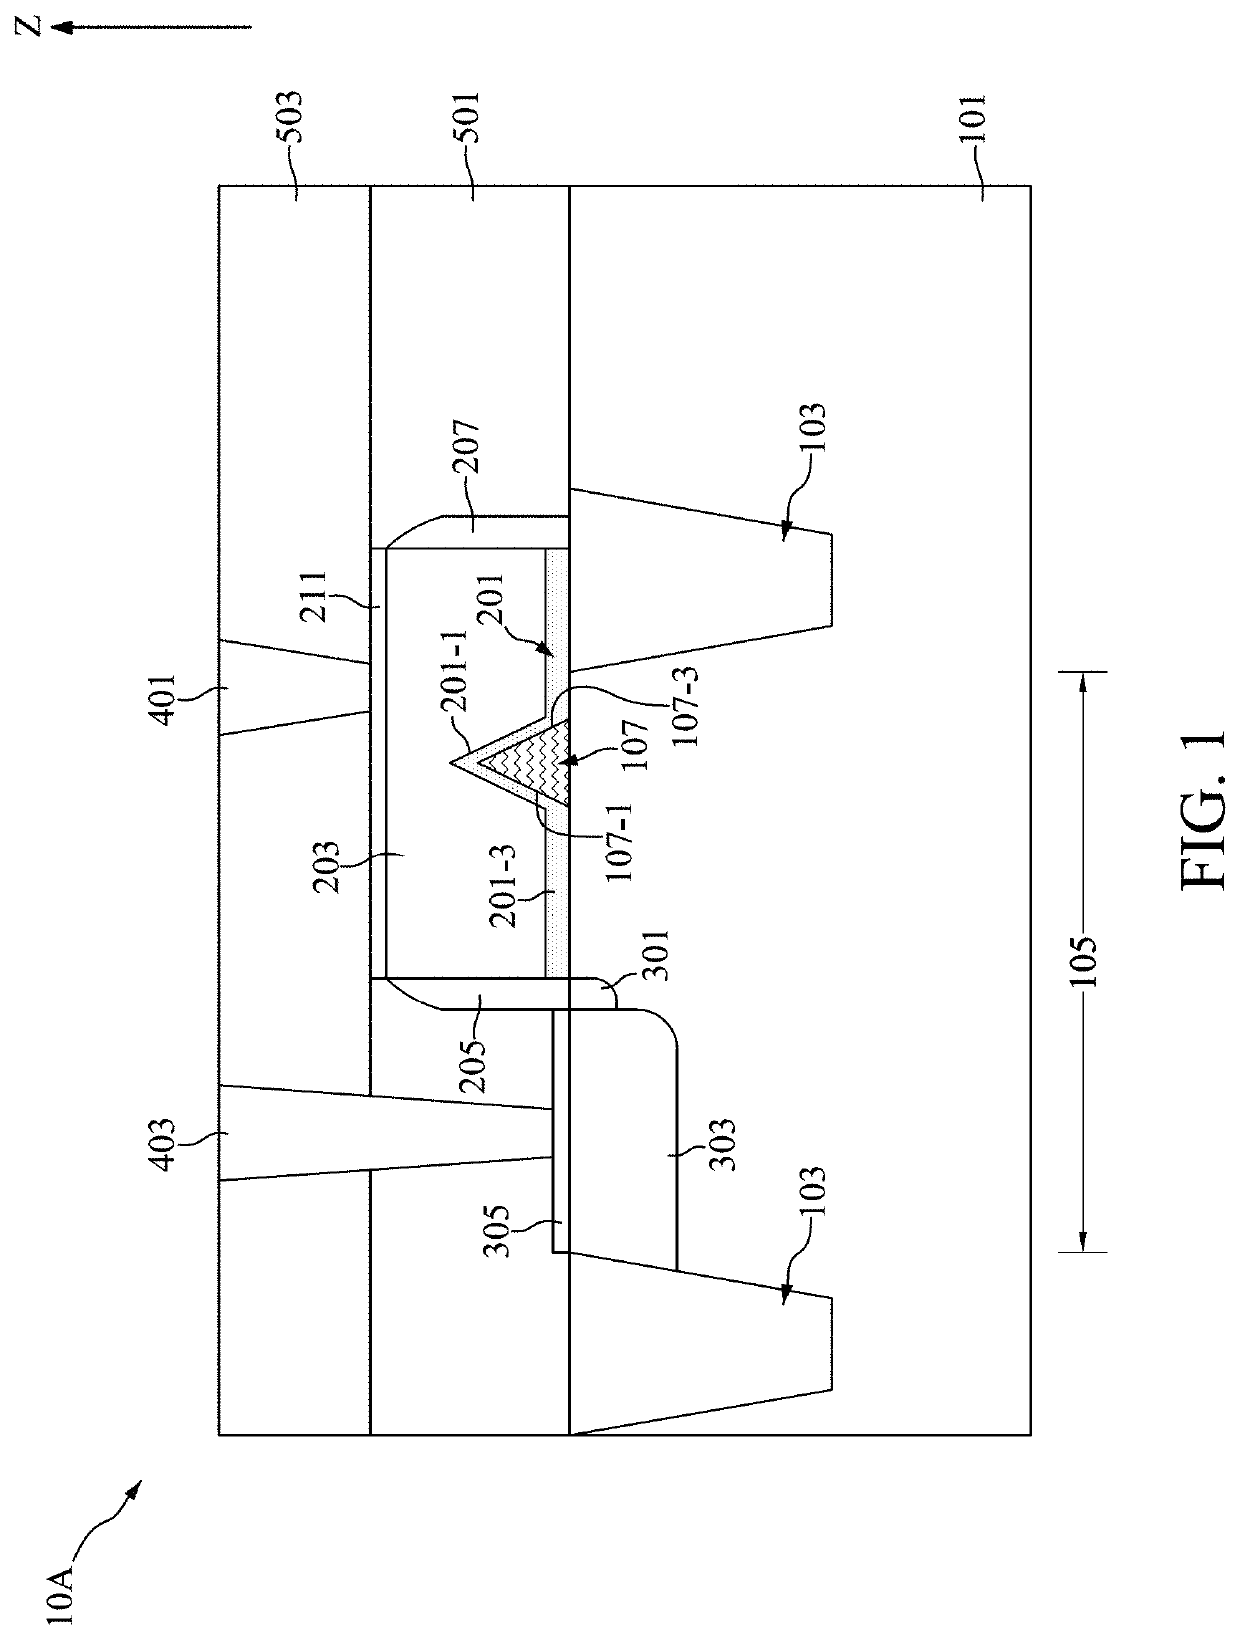 Semiconductor device with programmable anti-fuse feature and method for fabricating the same